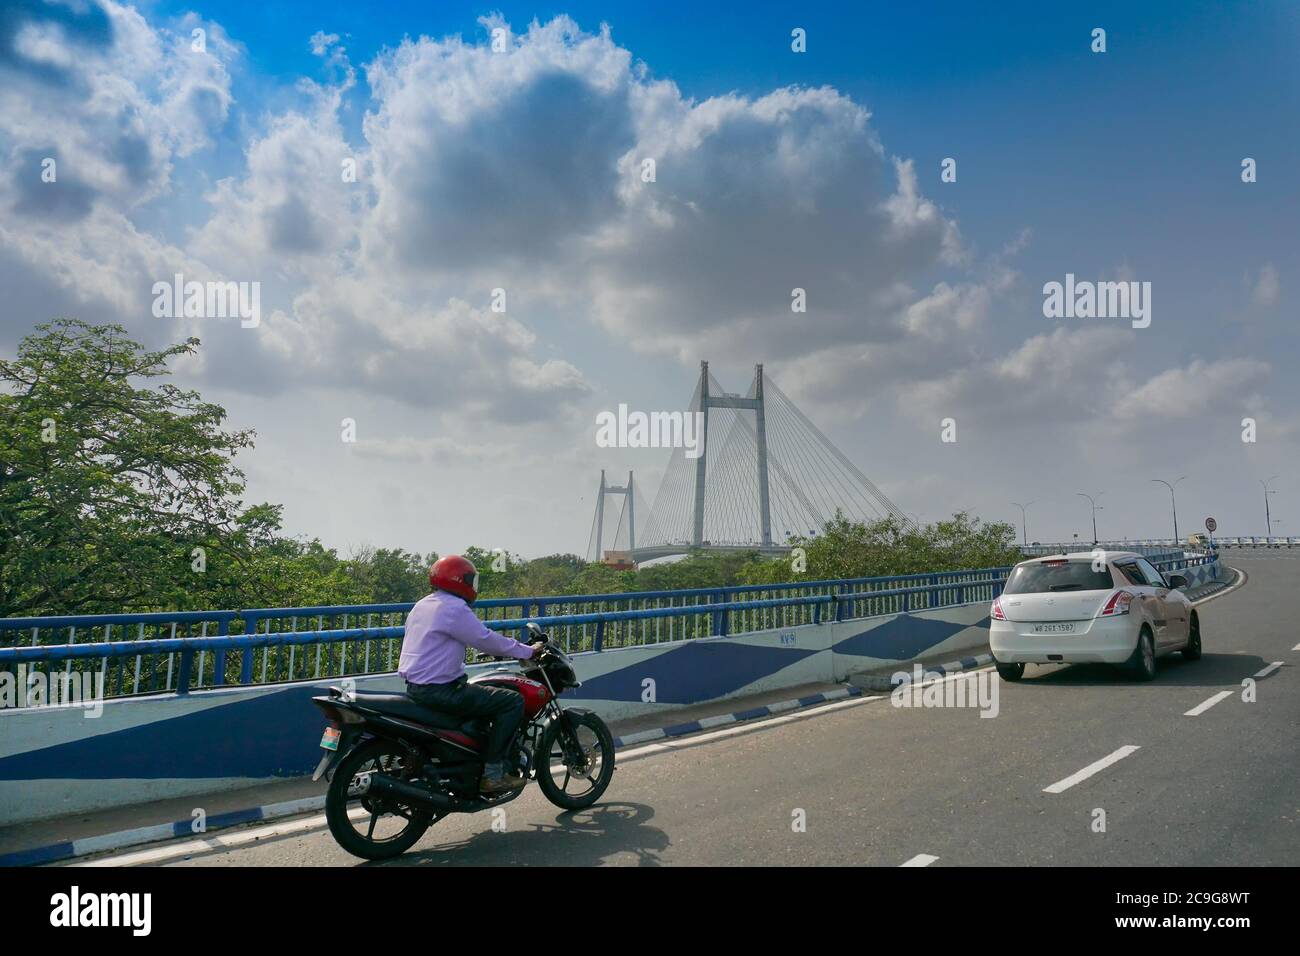 Kolkata, West Bengal, India - 23rd May 2020 : Blue sky with white clouds over 2nd Hoogly Bridge, connecting Howrah and Kolkata. Stock Photo